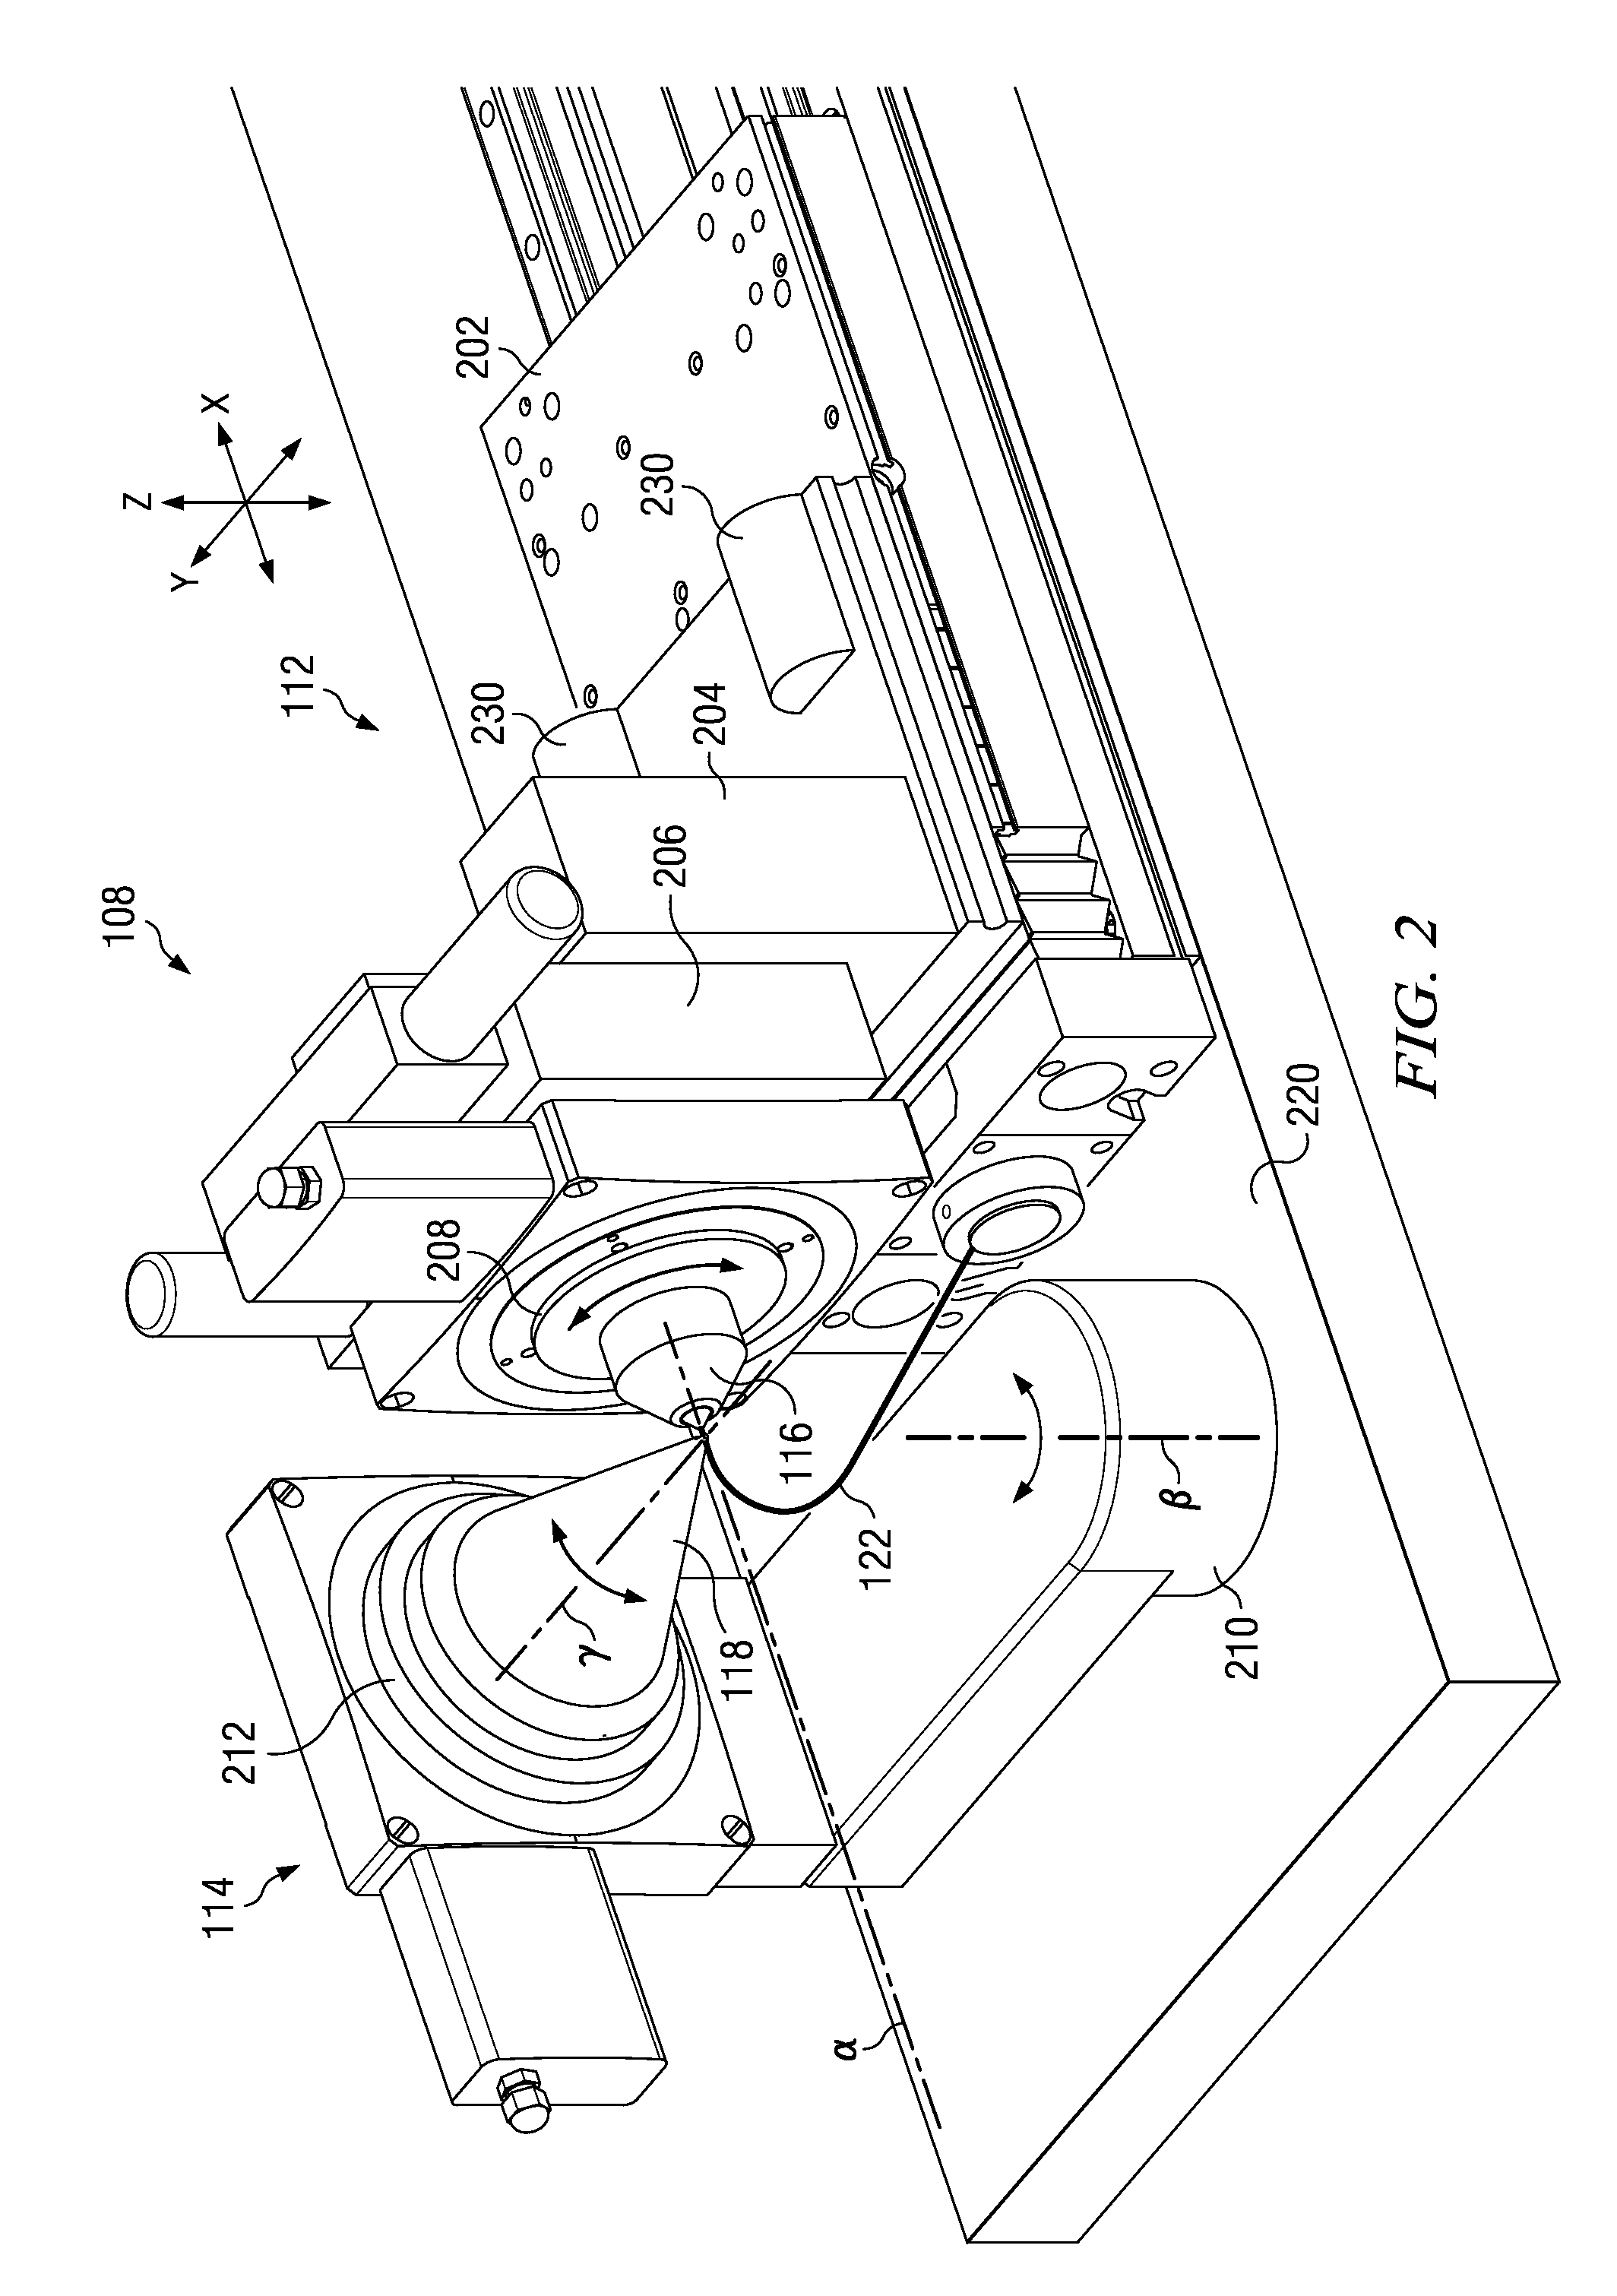 Apparatus and method for customized shaping of orthodontic archwires and other medical devices